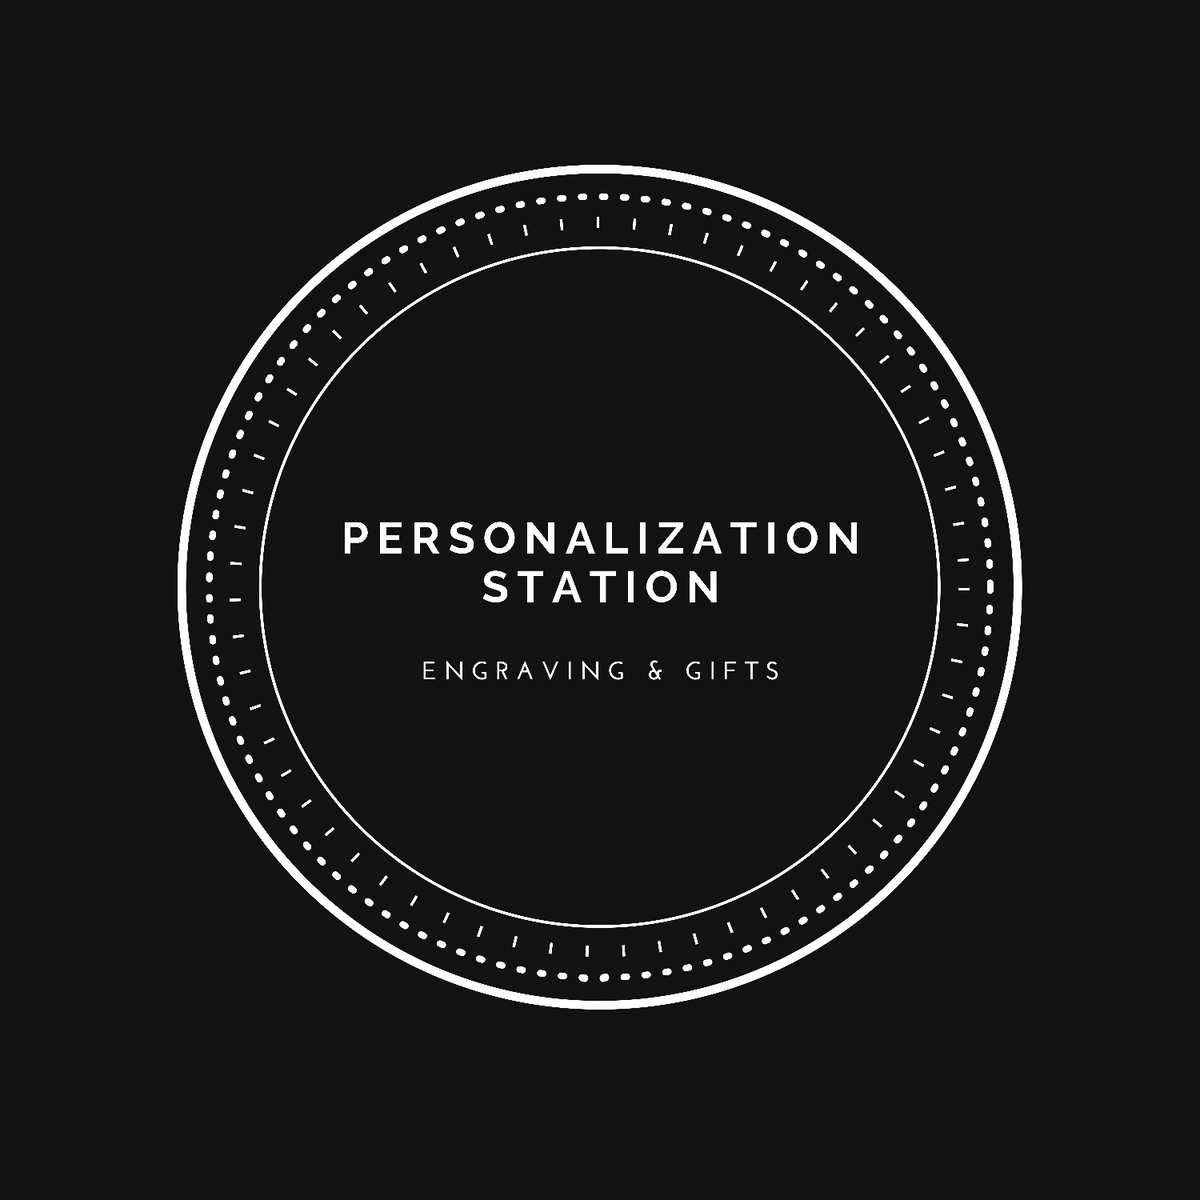 Personalization Station Engraving & Gifts